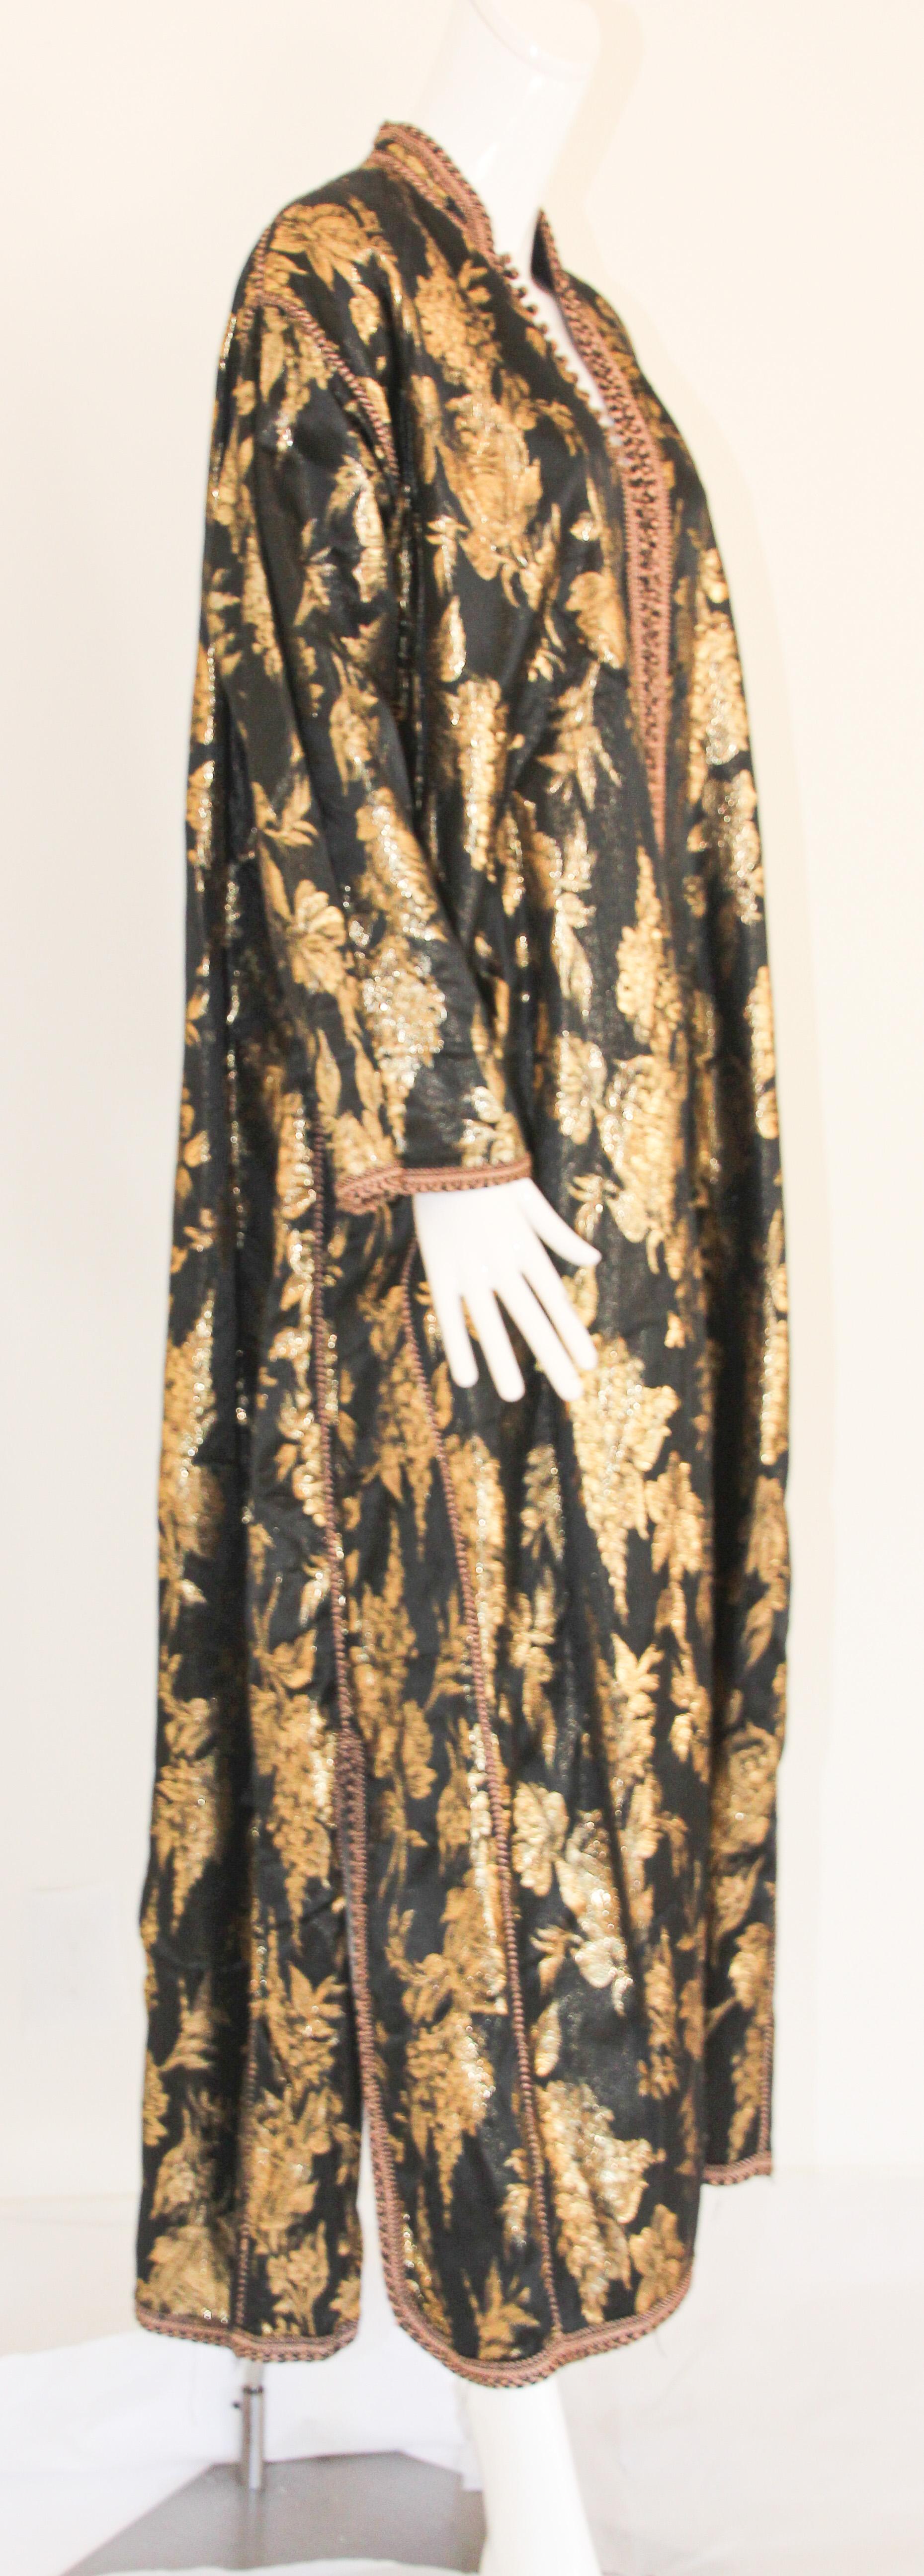 Vintage Moroccan Caftan, Black and Gold Embroidered, ca. 1960s For Sale 3